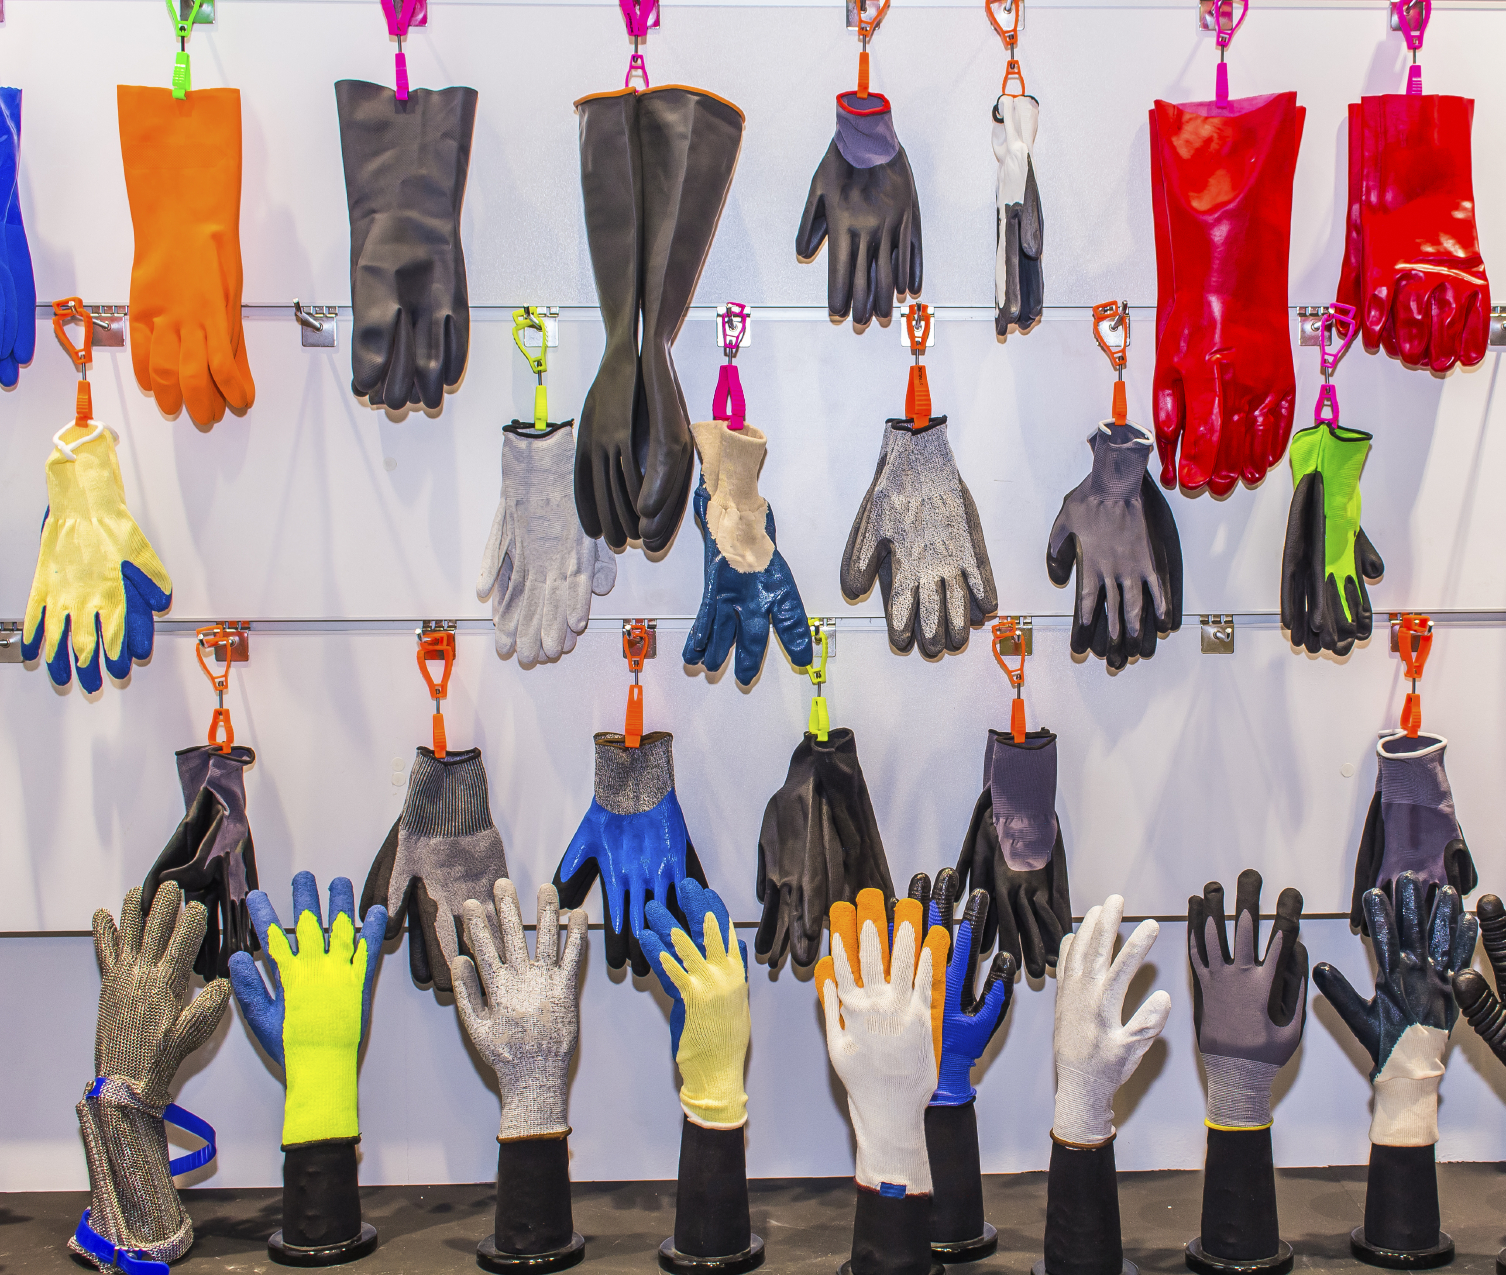 Choosing Your PPE: Work Glove Selection Tips for Construction